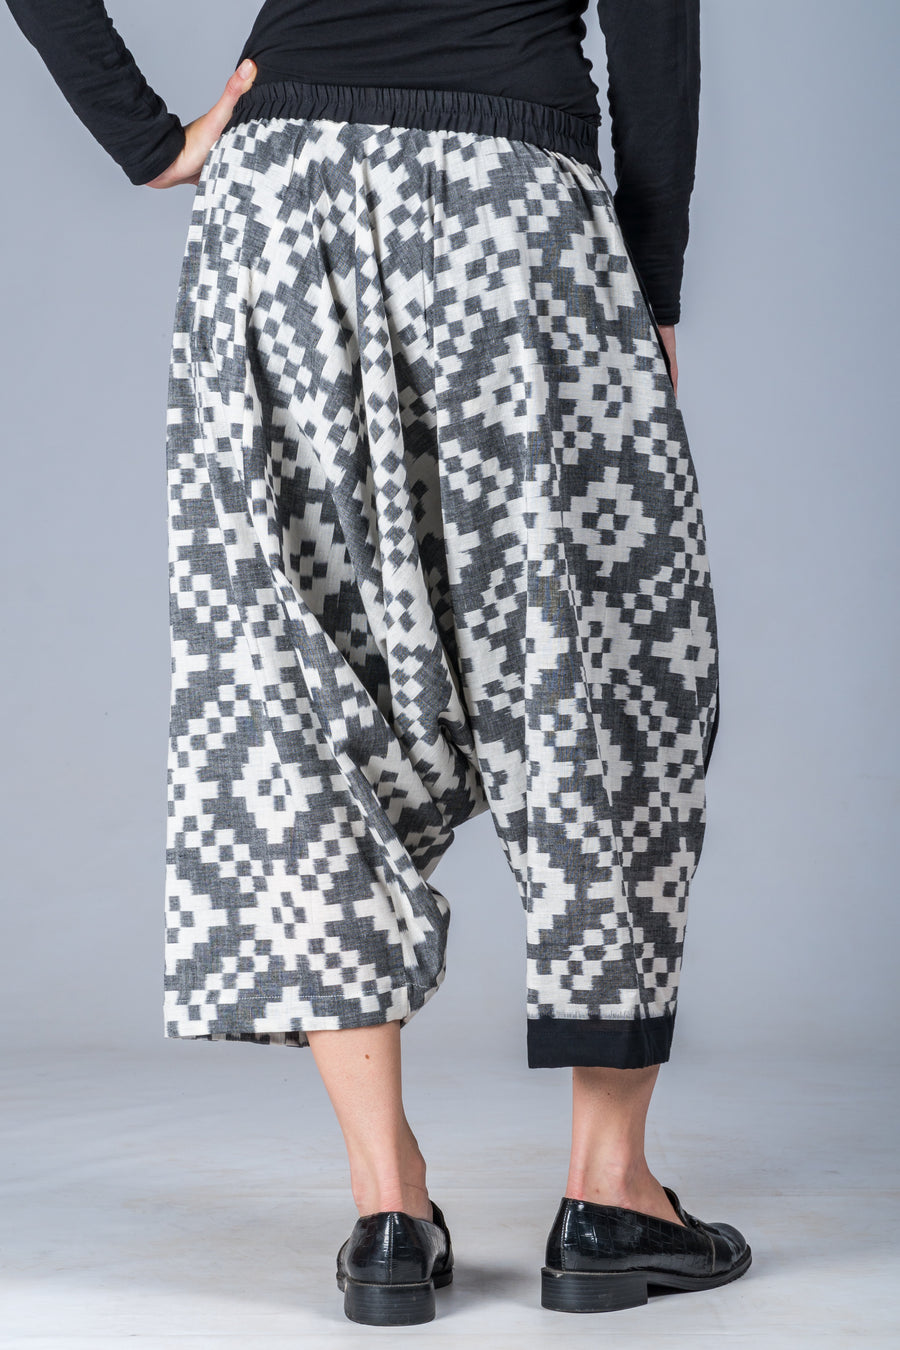 White and Grey Ikat Pattern - Turkish Mid Length Pant